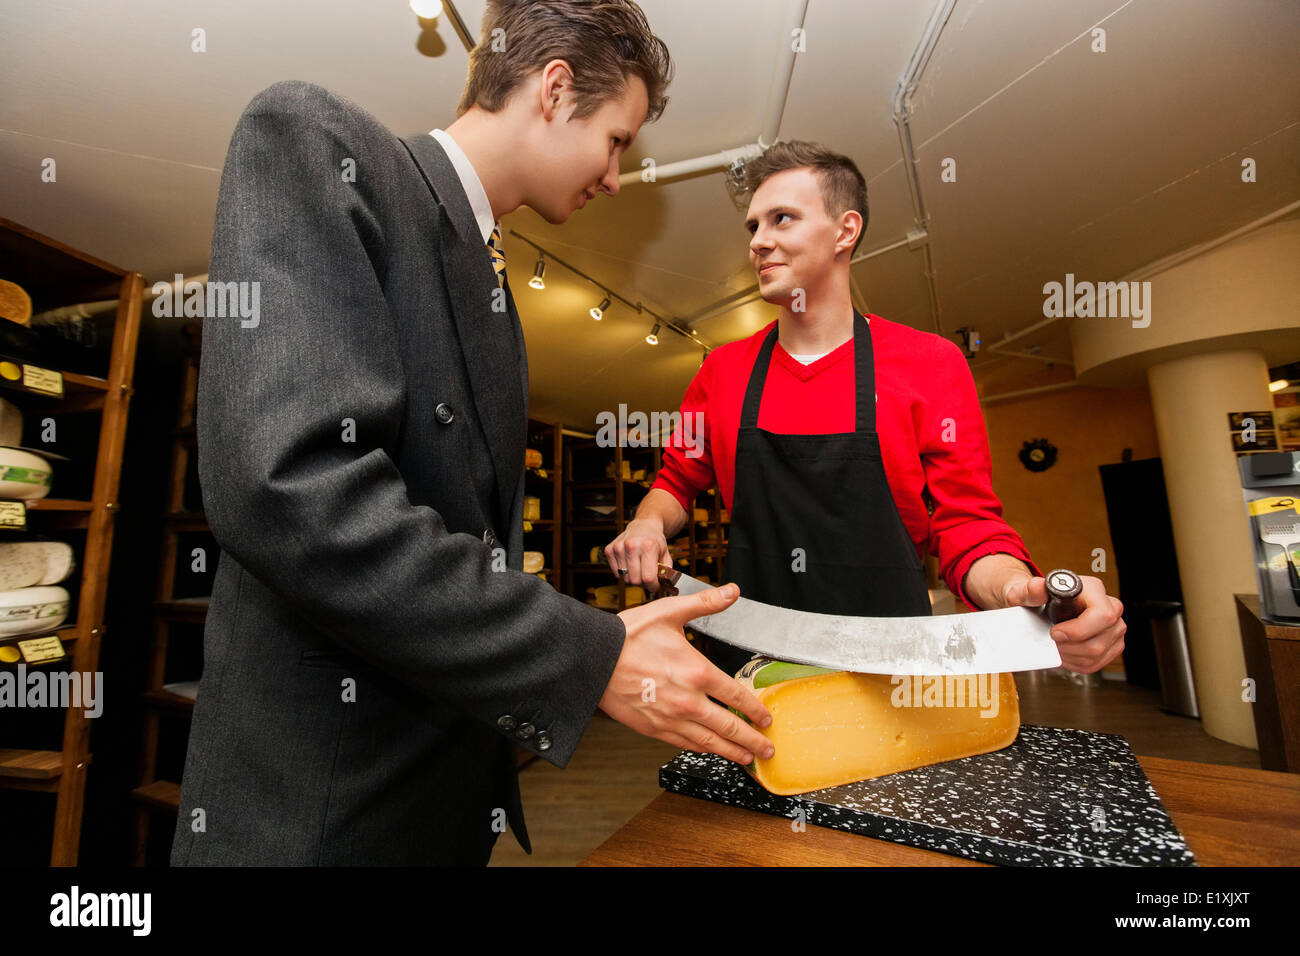 Young store clear cutting cheese for businessman Stock Photo